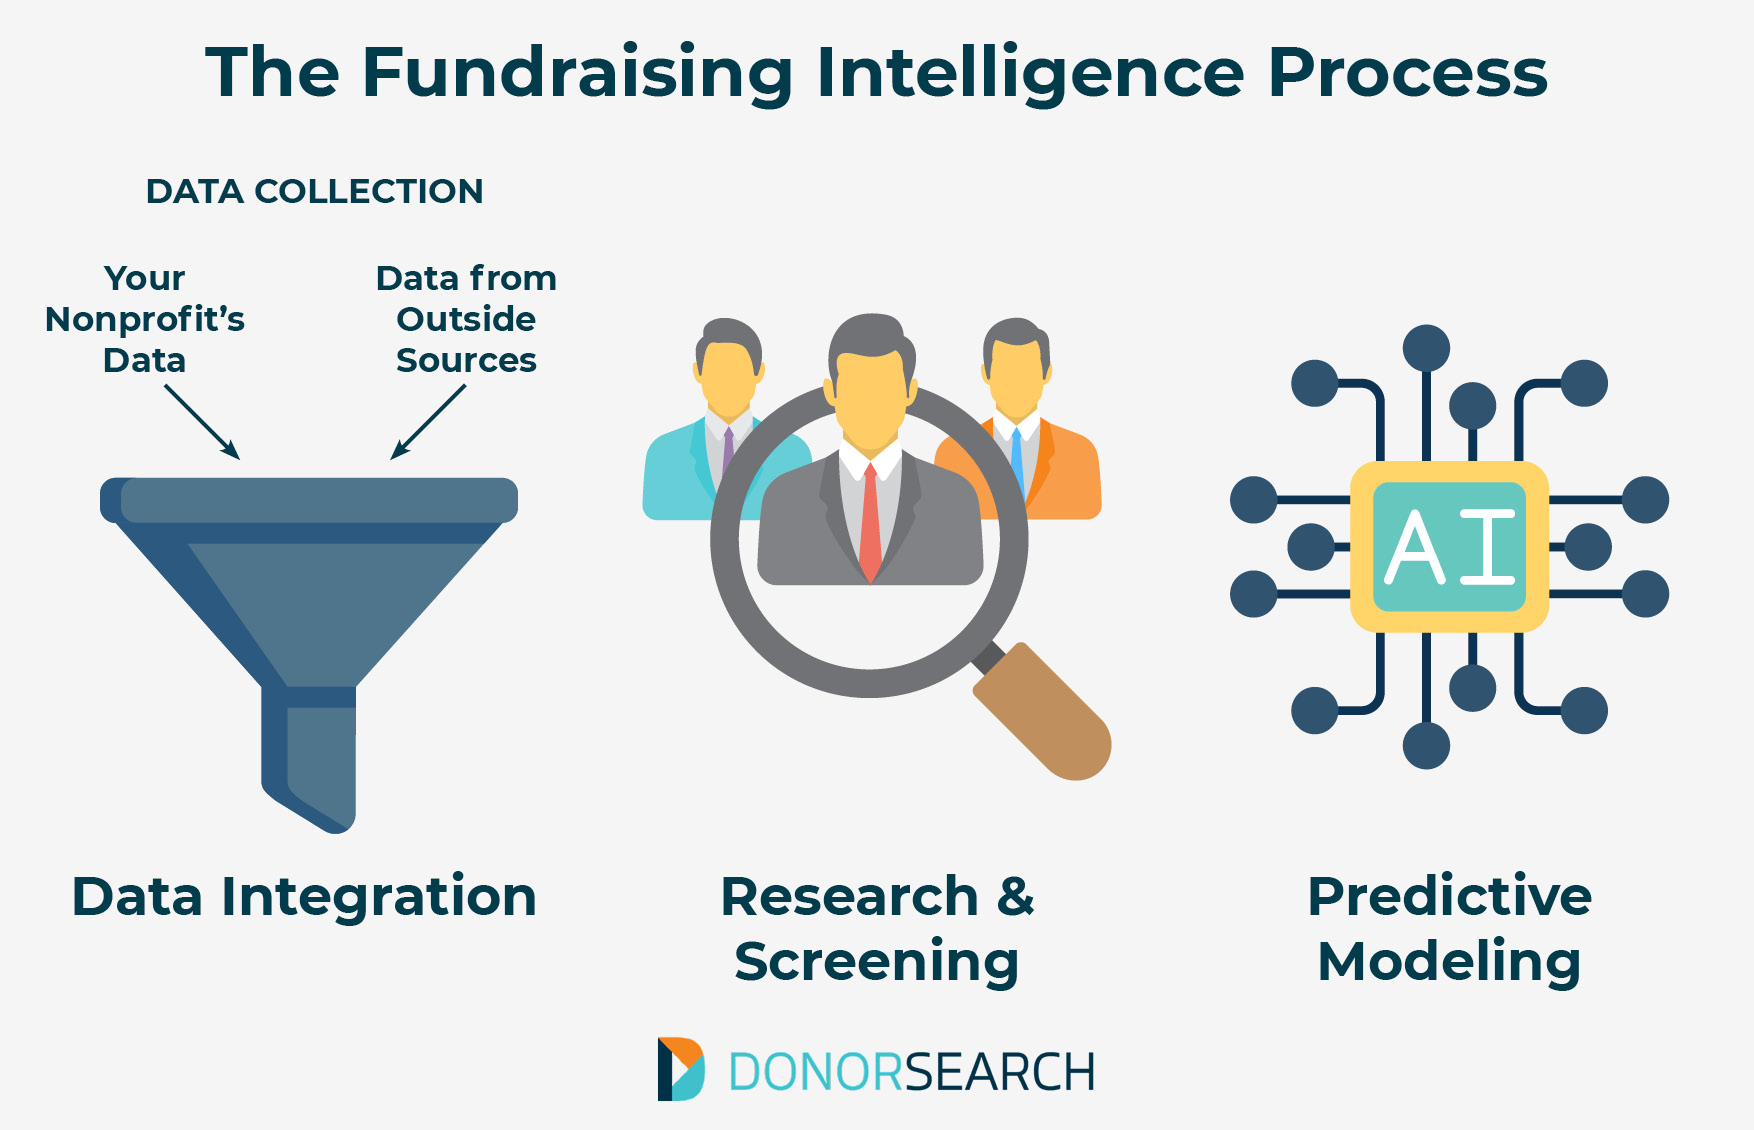 This image and the text below walk through the fundraising intelligence process. 